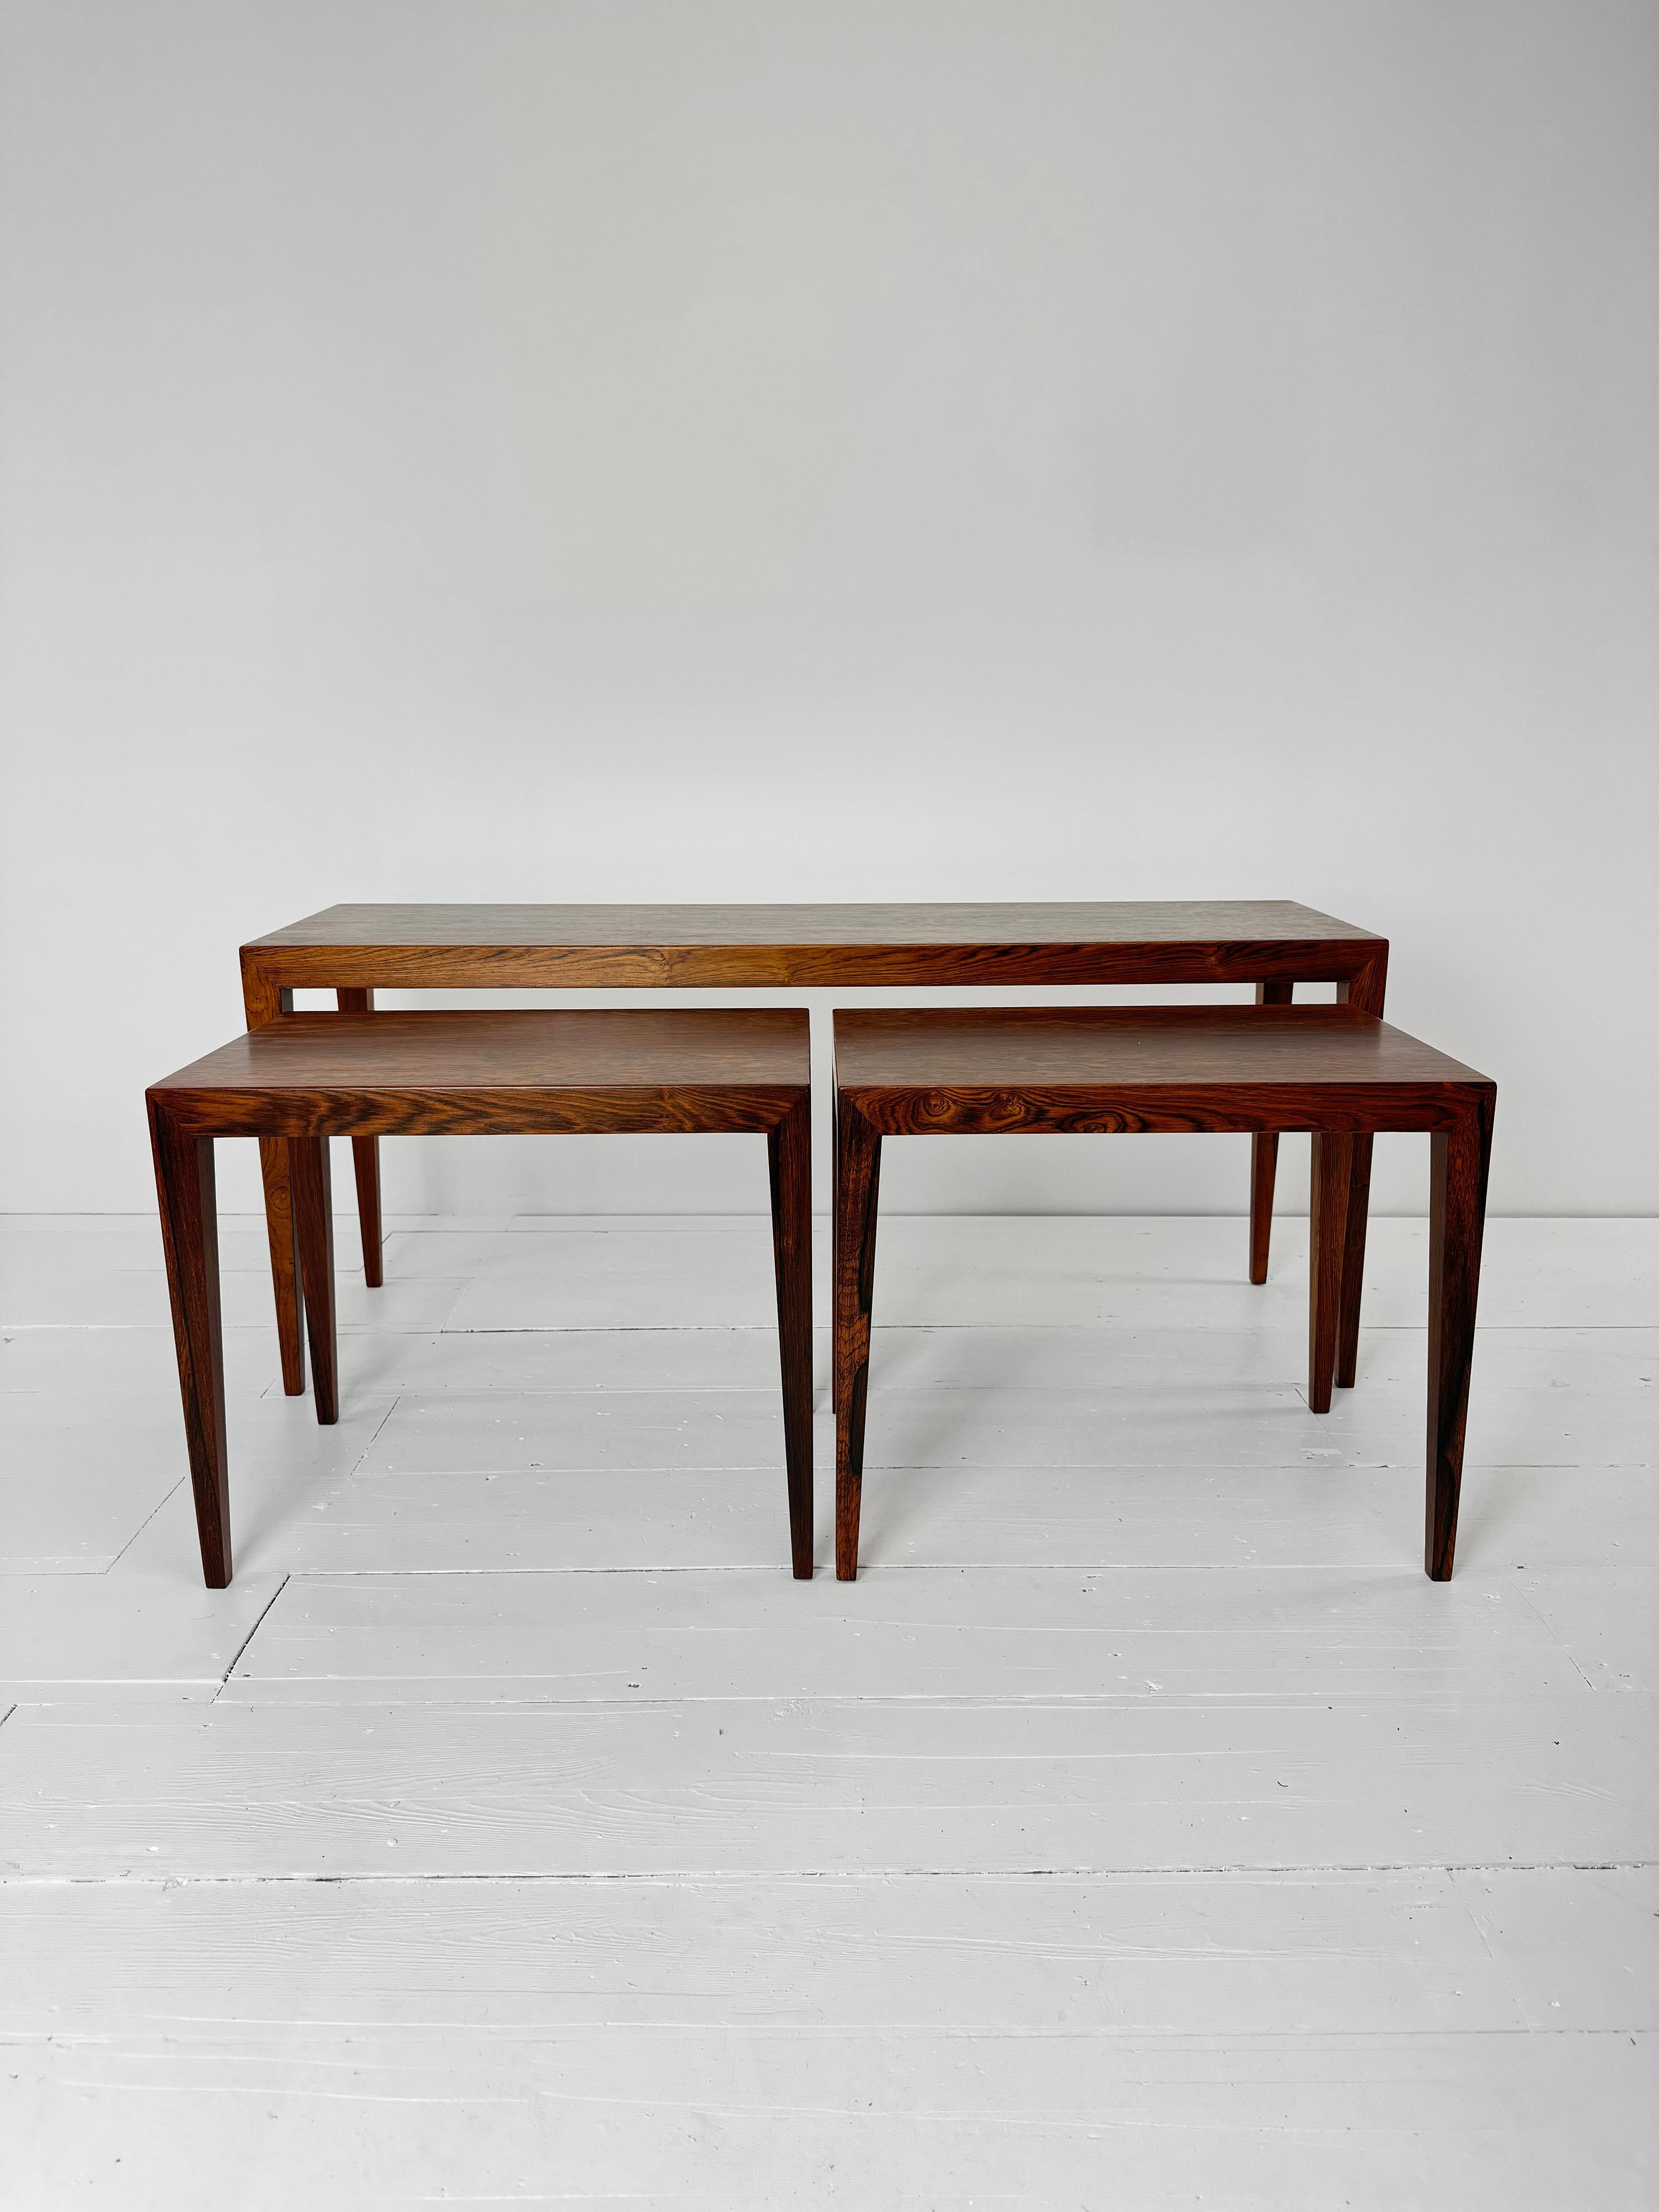 This stunning nesting table set is a true vintage find, designed by renowned Danish designer Severin Hansen for the esteemed Haslev Møbelsnedkeri. Crafted from rich and exquisite Teak fame with Rosewood veneer, these tables exude Mid-Century Modern